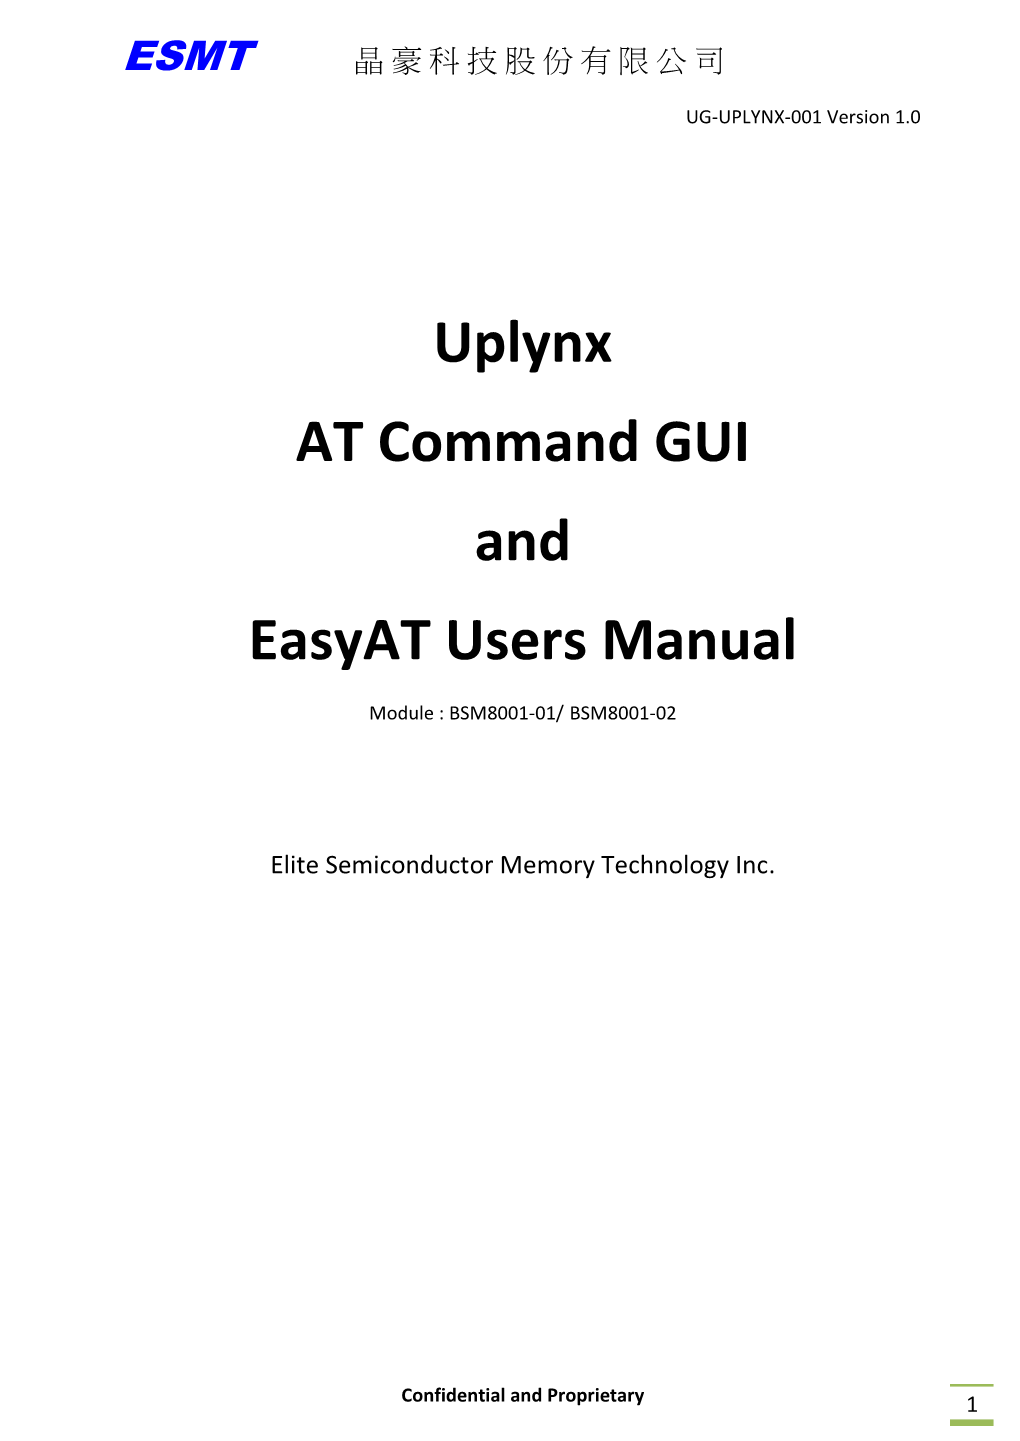 Uplynx at Command GUI and Easyat Users Manual